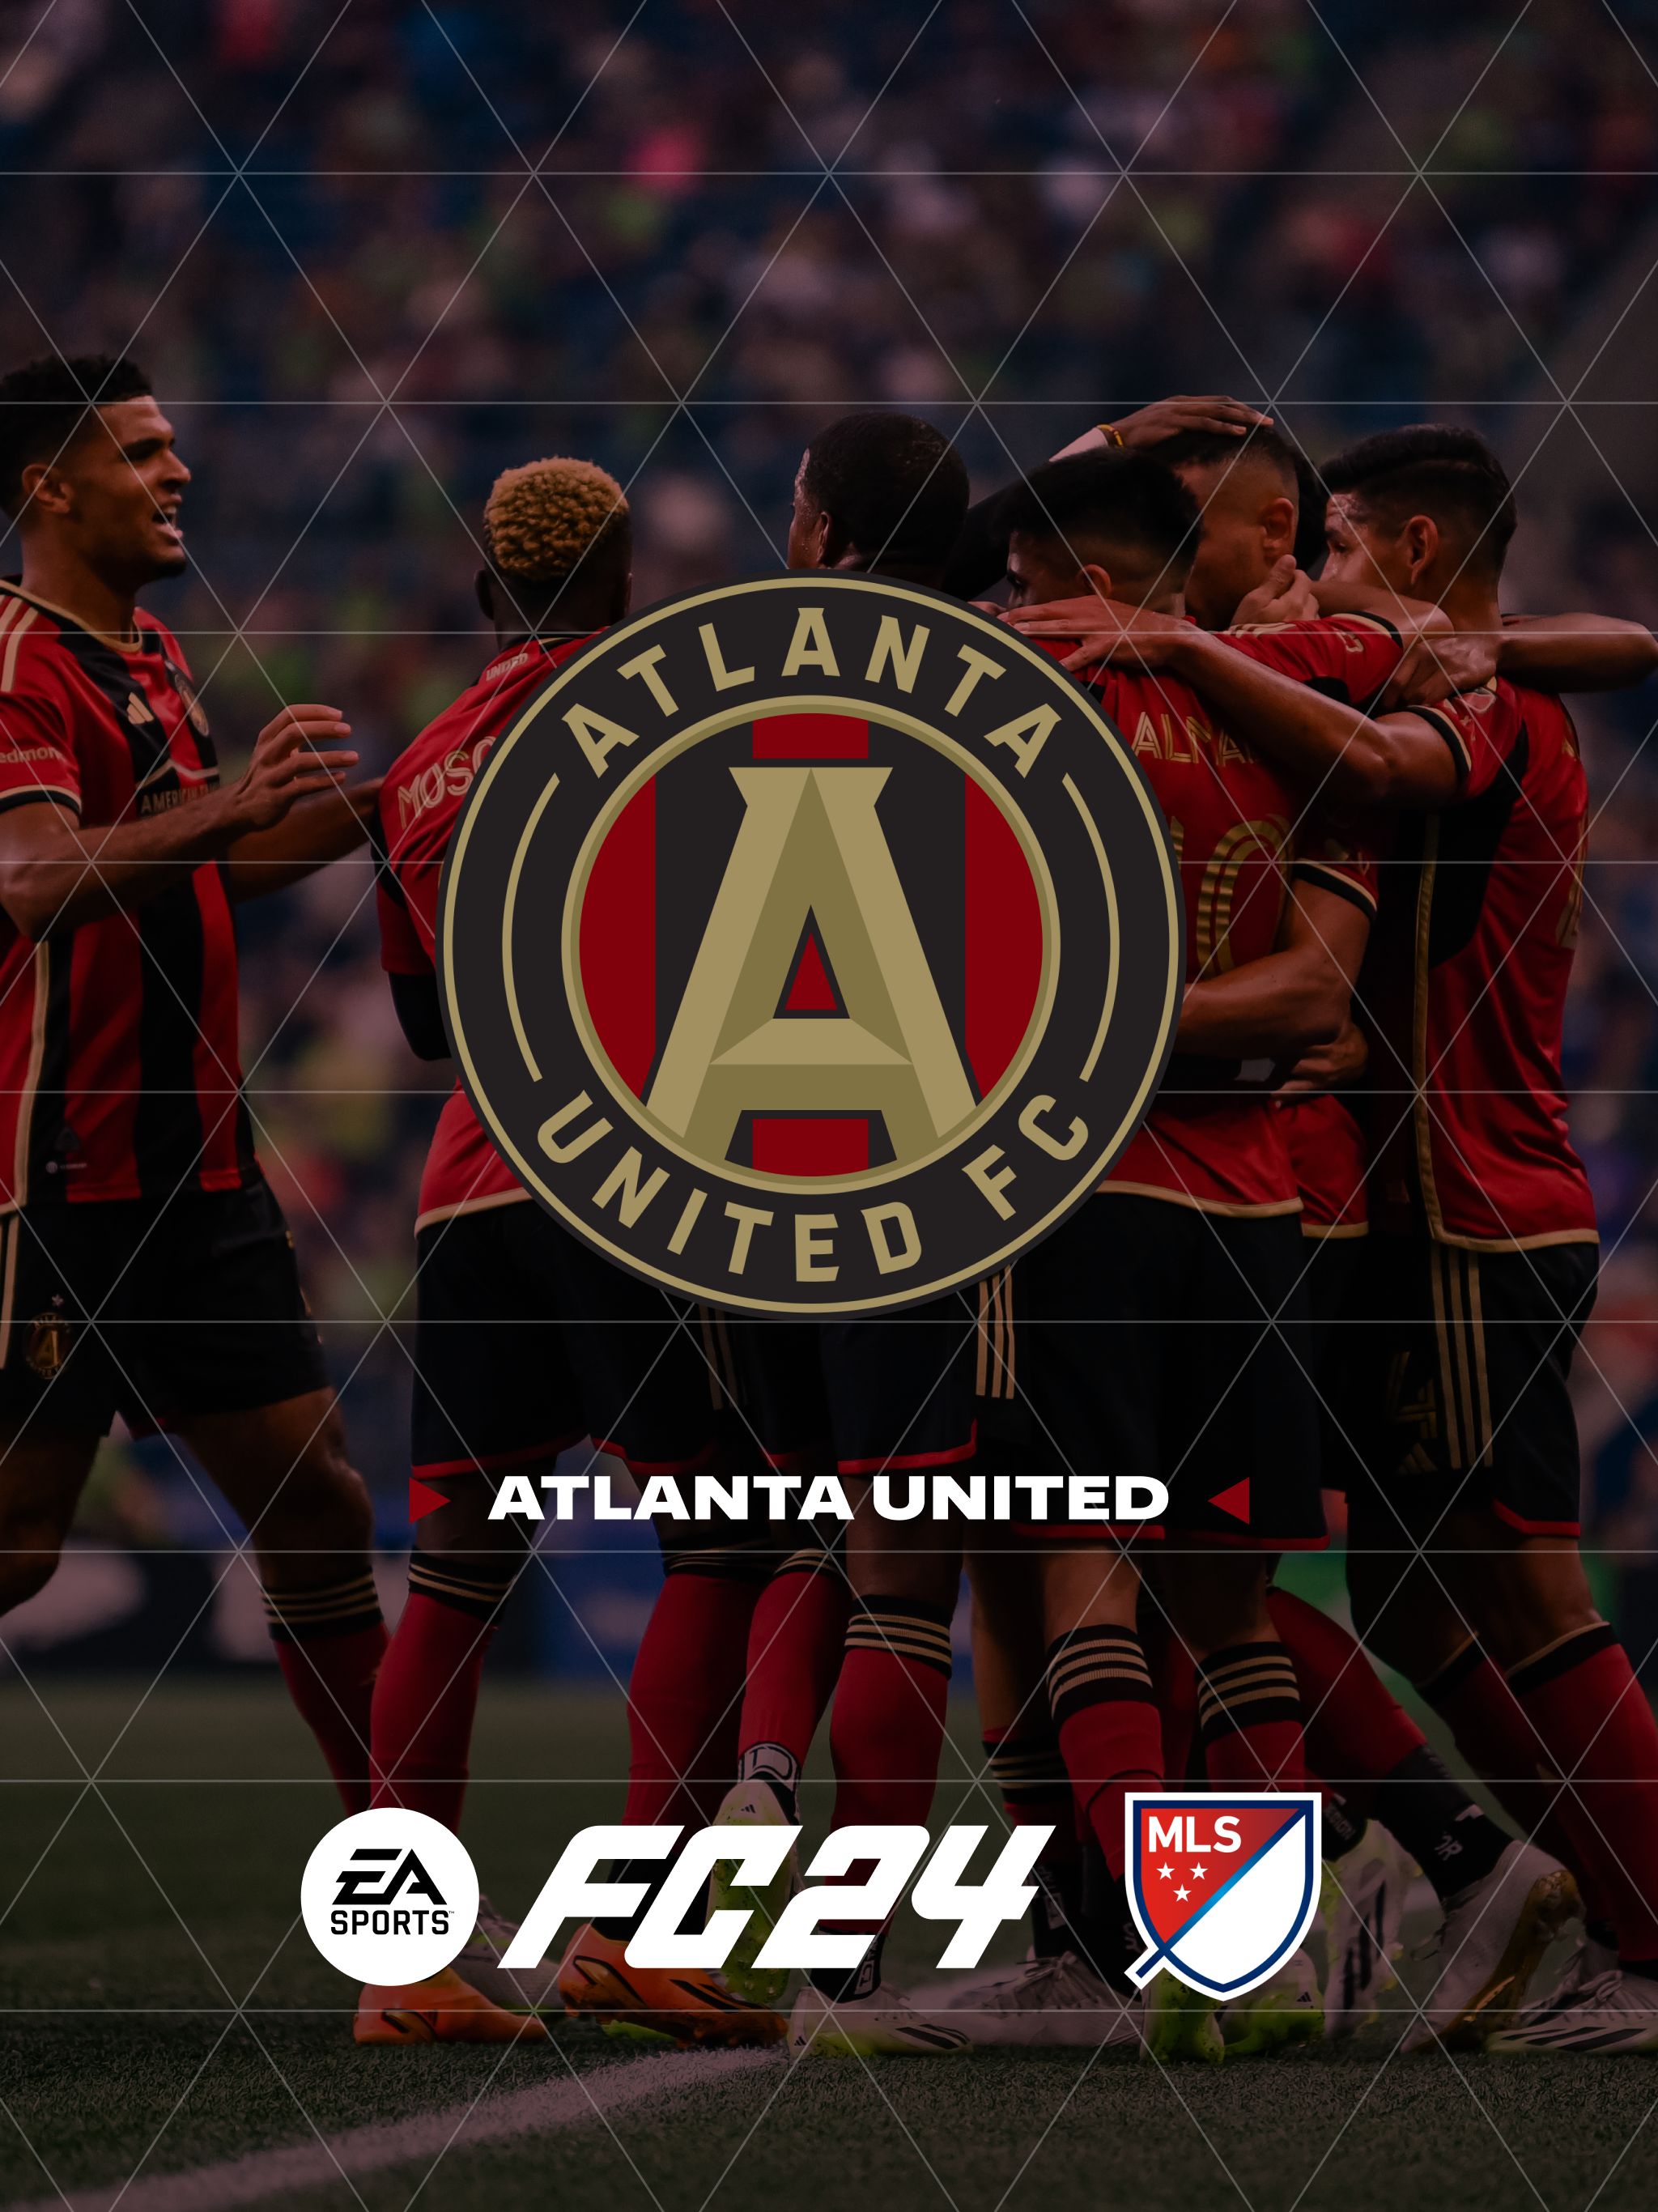 Welcome to the Club: EA SPORTS FC 24 officially launches with  fully-licensed Atlanta United